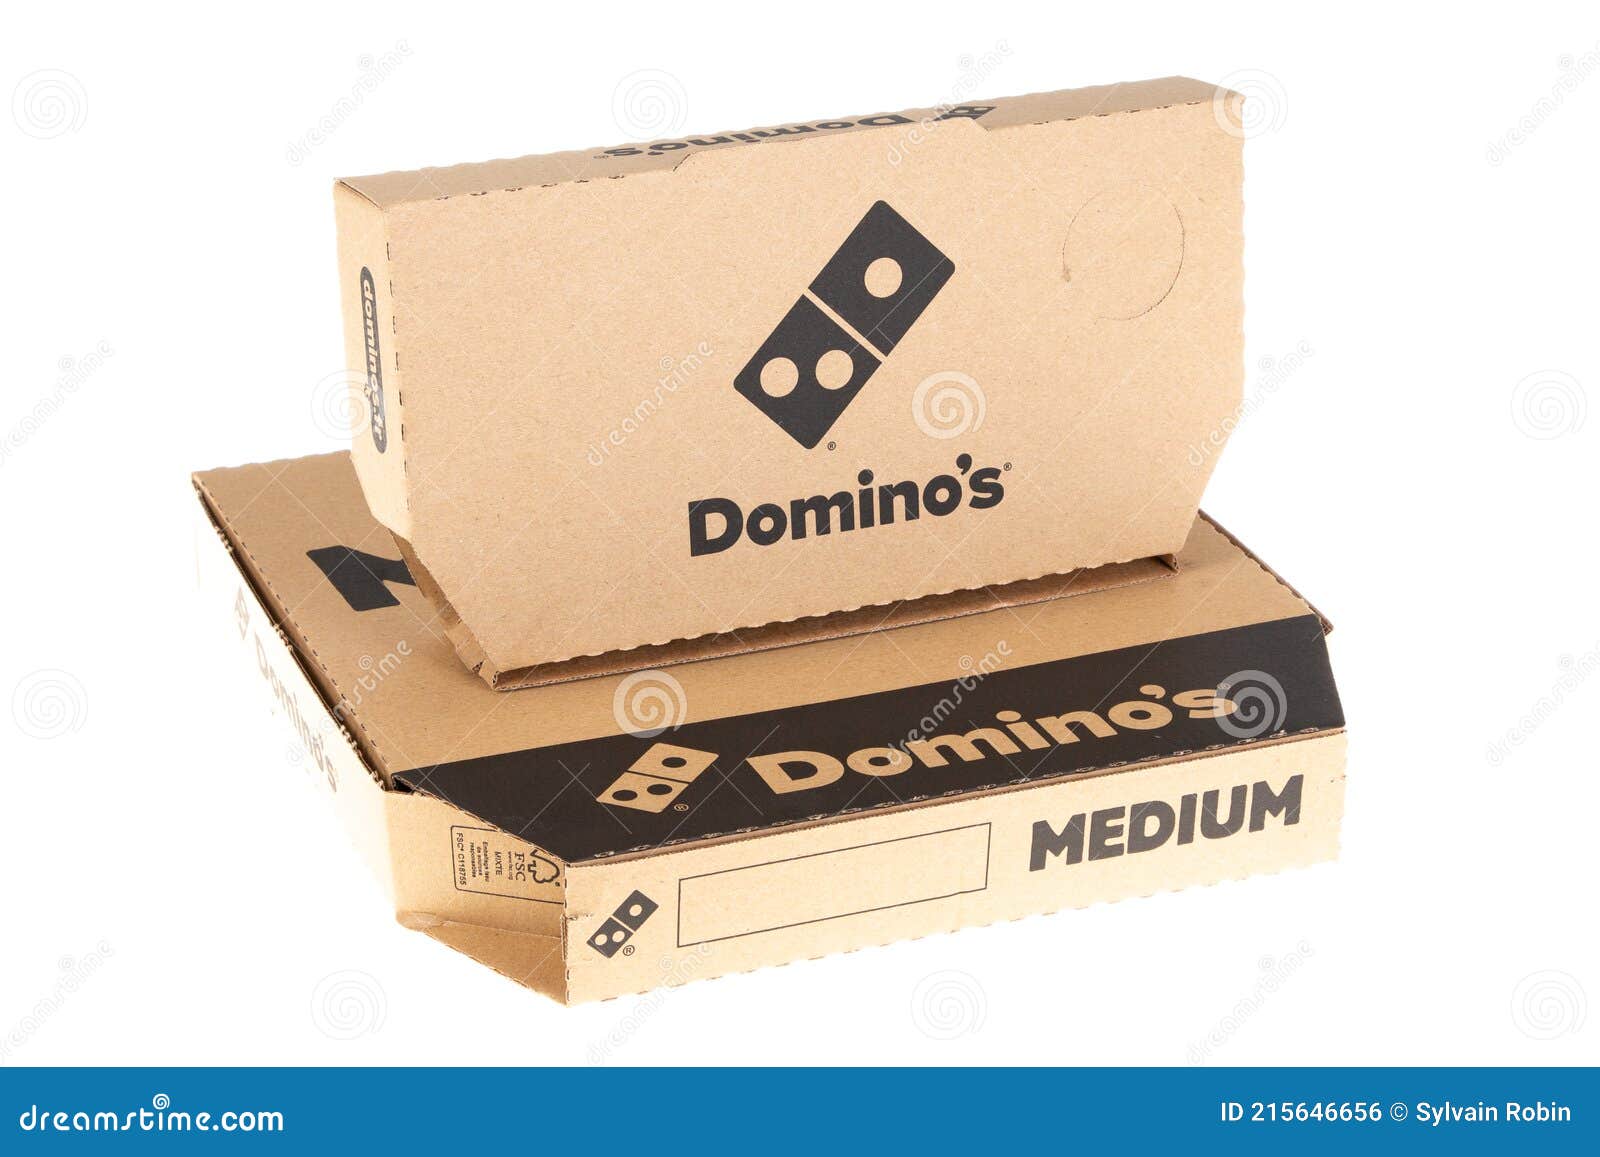 Dominos Pizza Logo Brand and French Text Sign on Different Carton Brown Box  Take Away Editorial Photo - Image of away, illustrative: 215646656